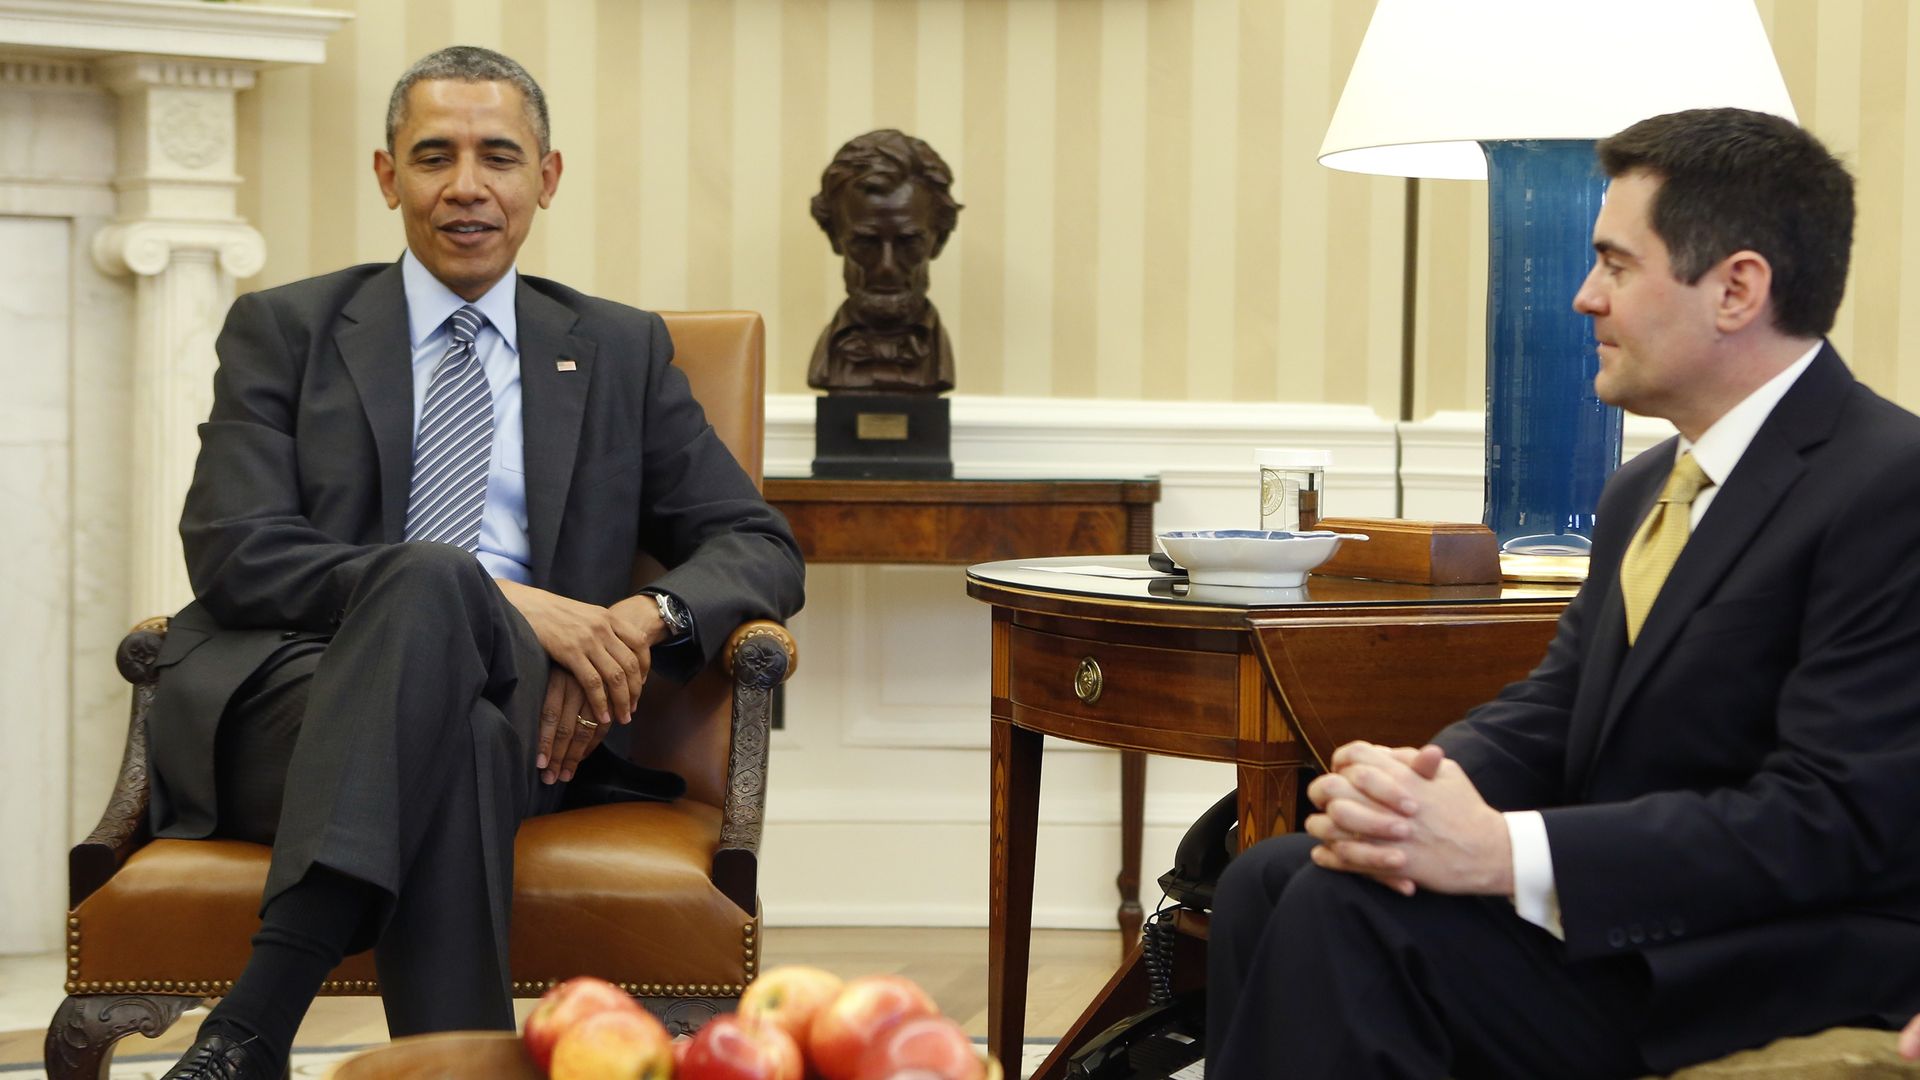 Picture of Russell Moore meeting with former President Obama in the oval office in 2019